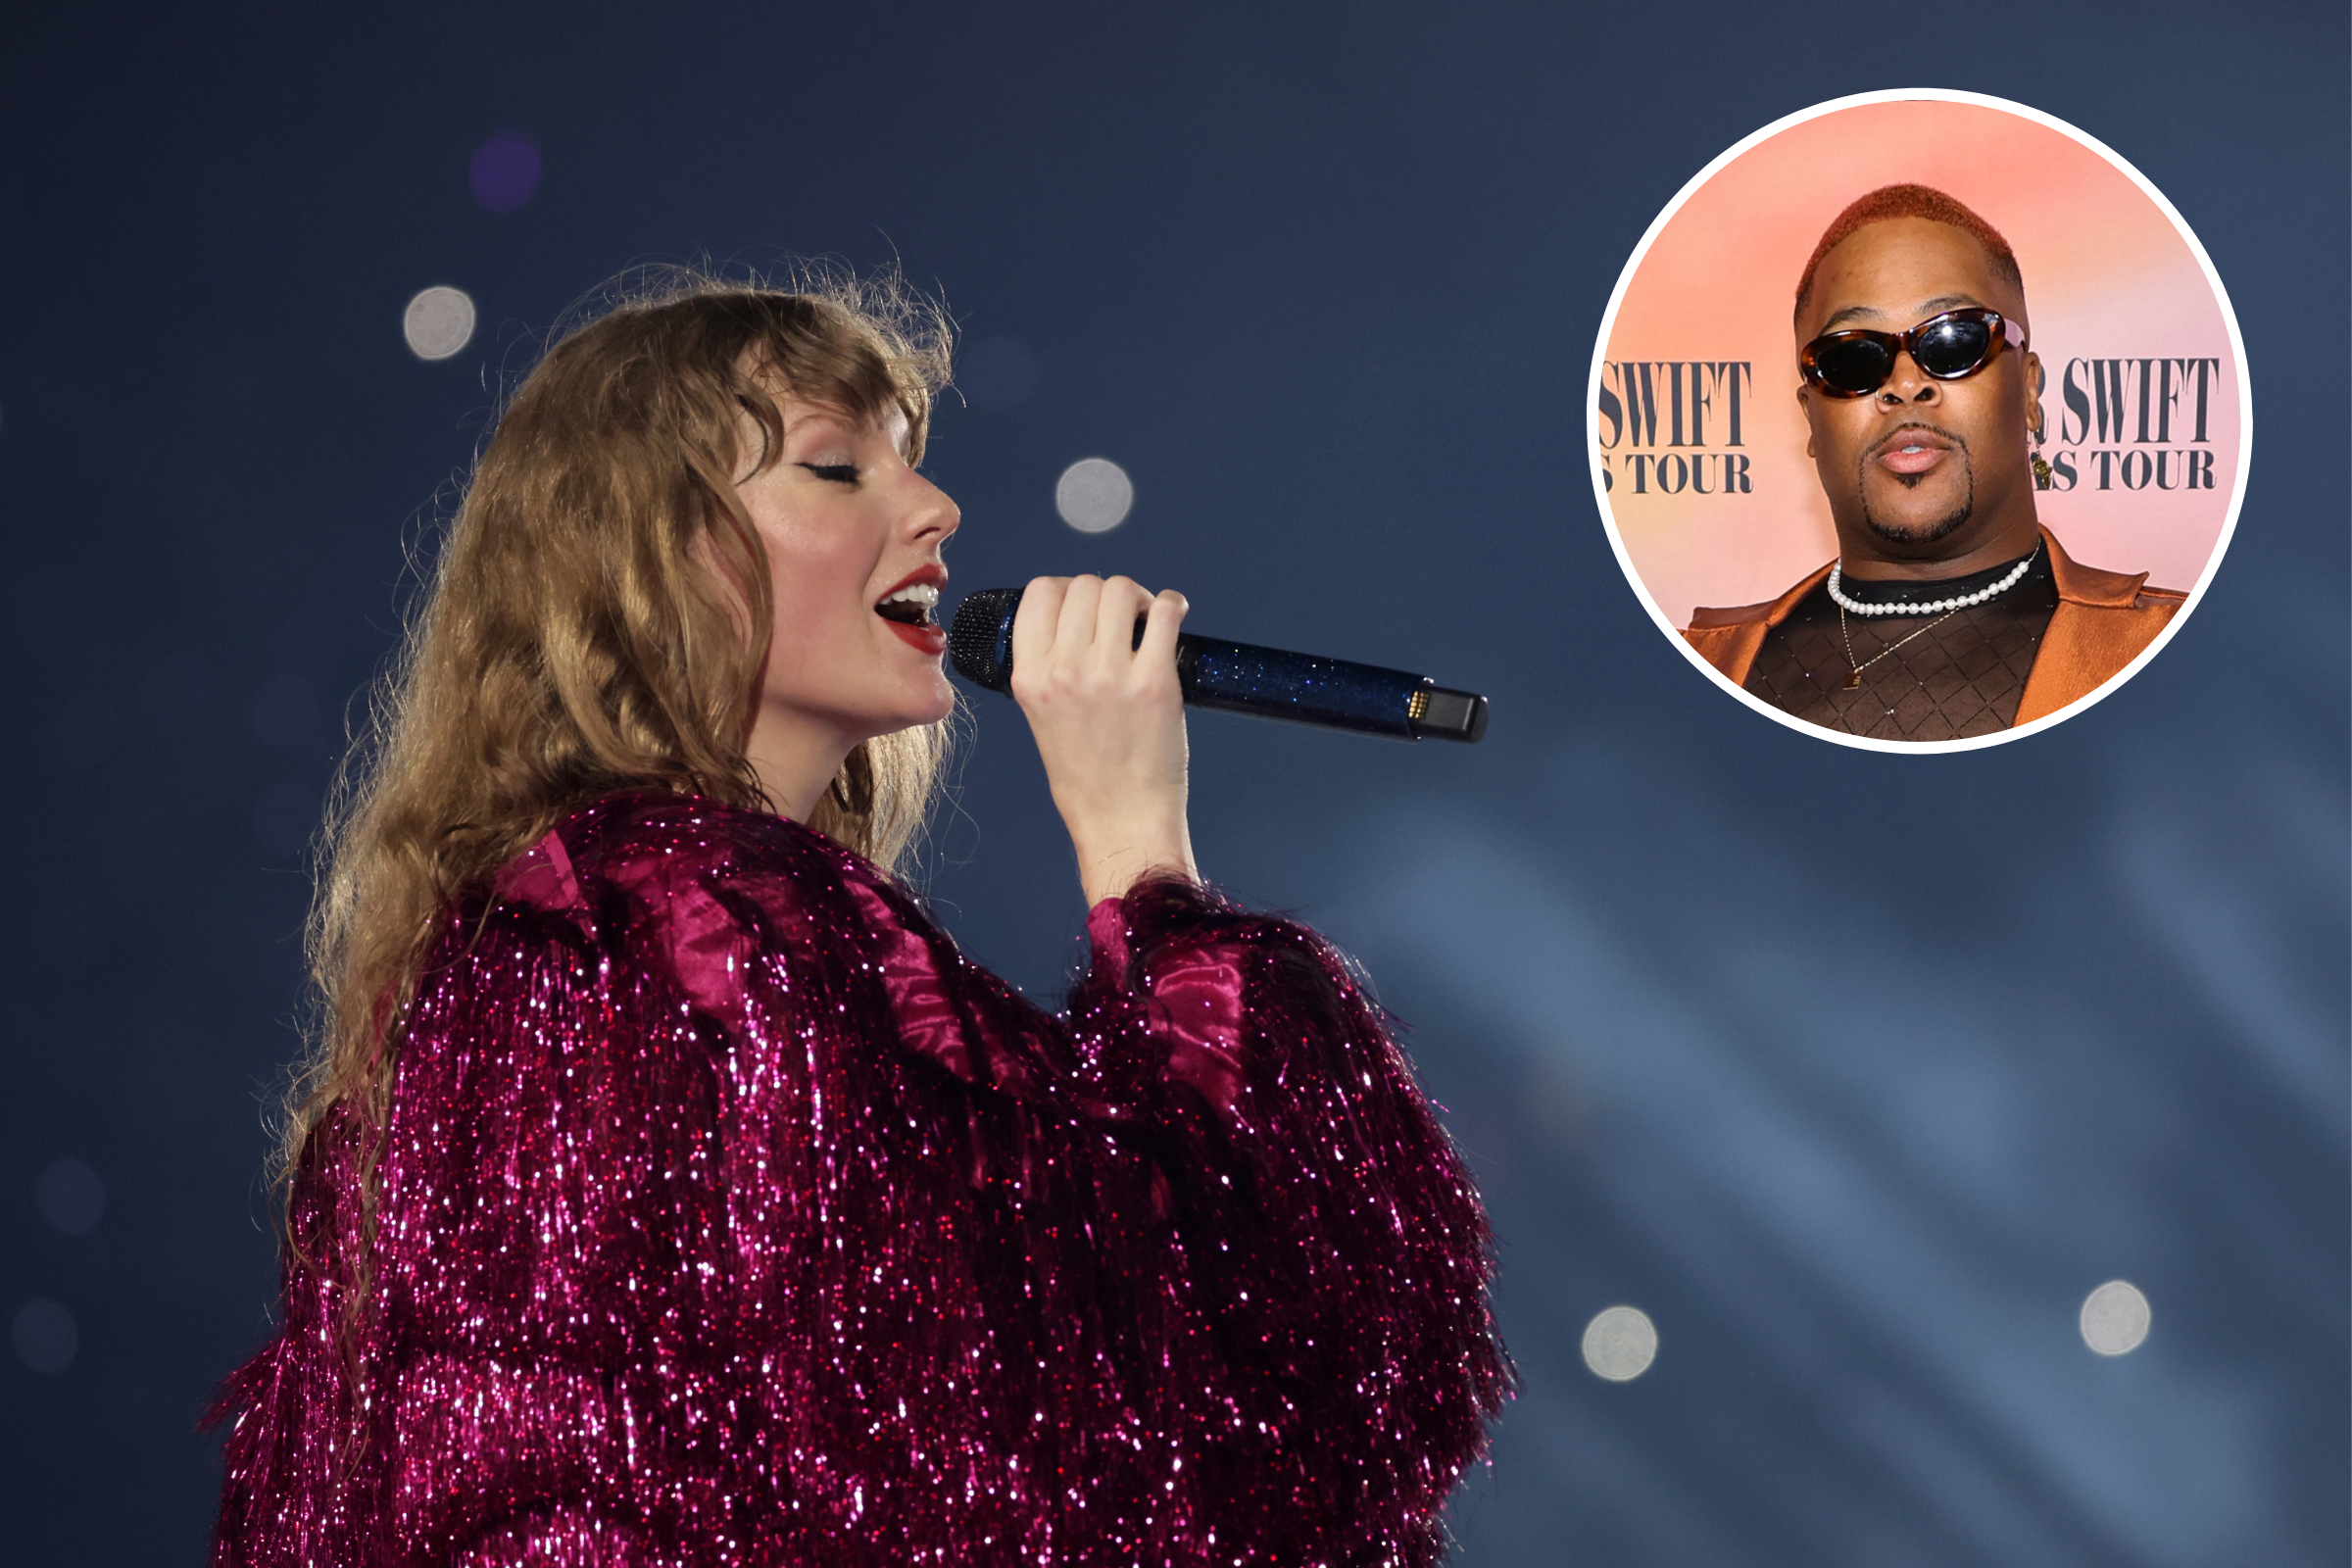 Taylor Swift audience screams when backup dancer takes mic on stage